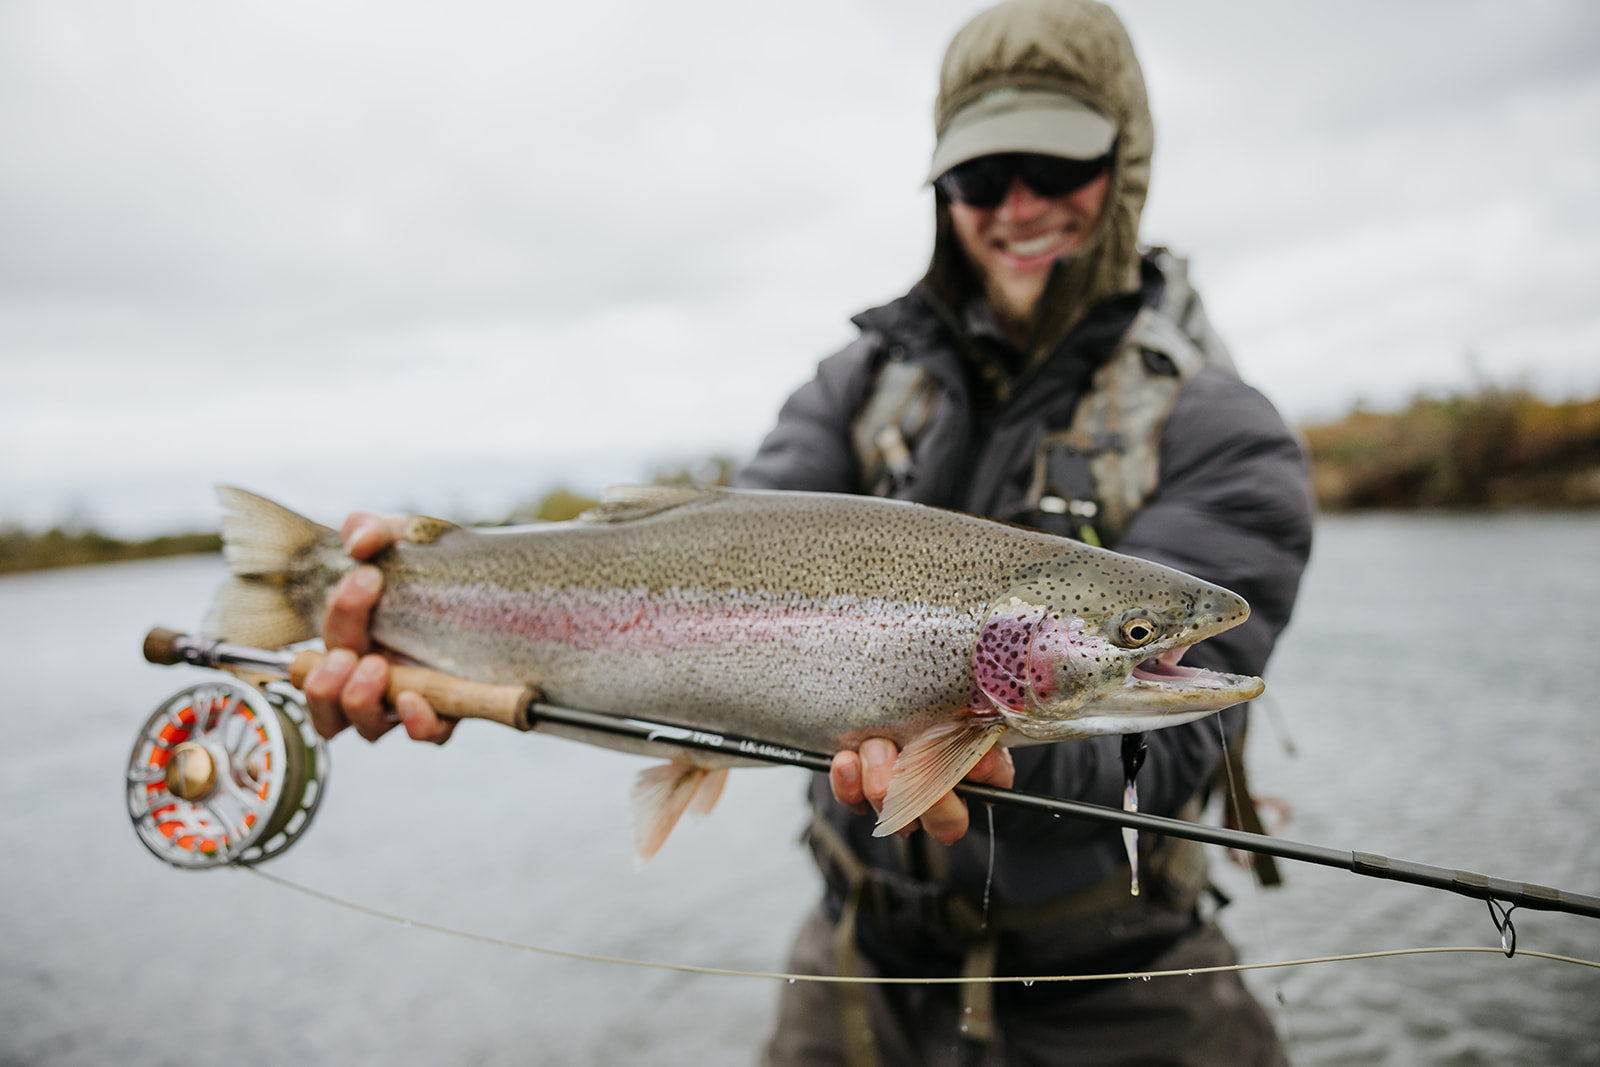 Angler smiling while holding up a trout